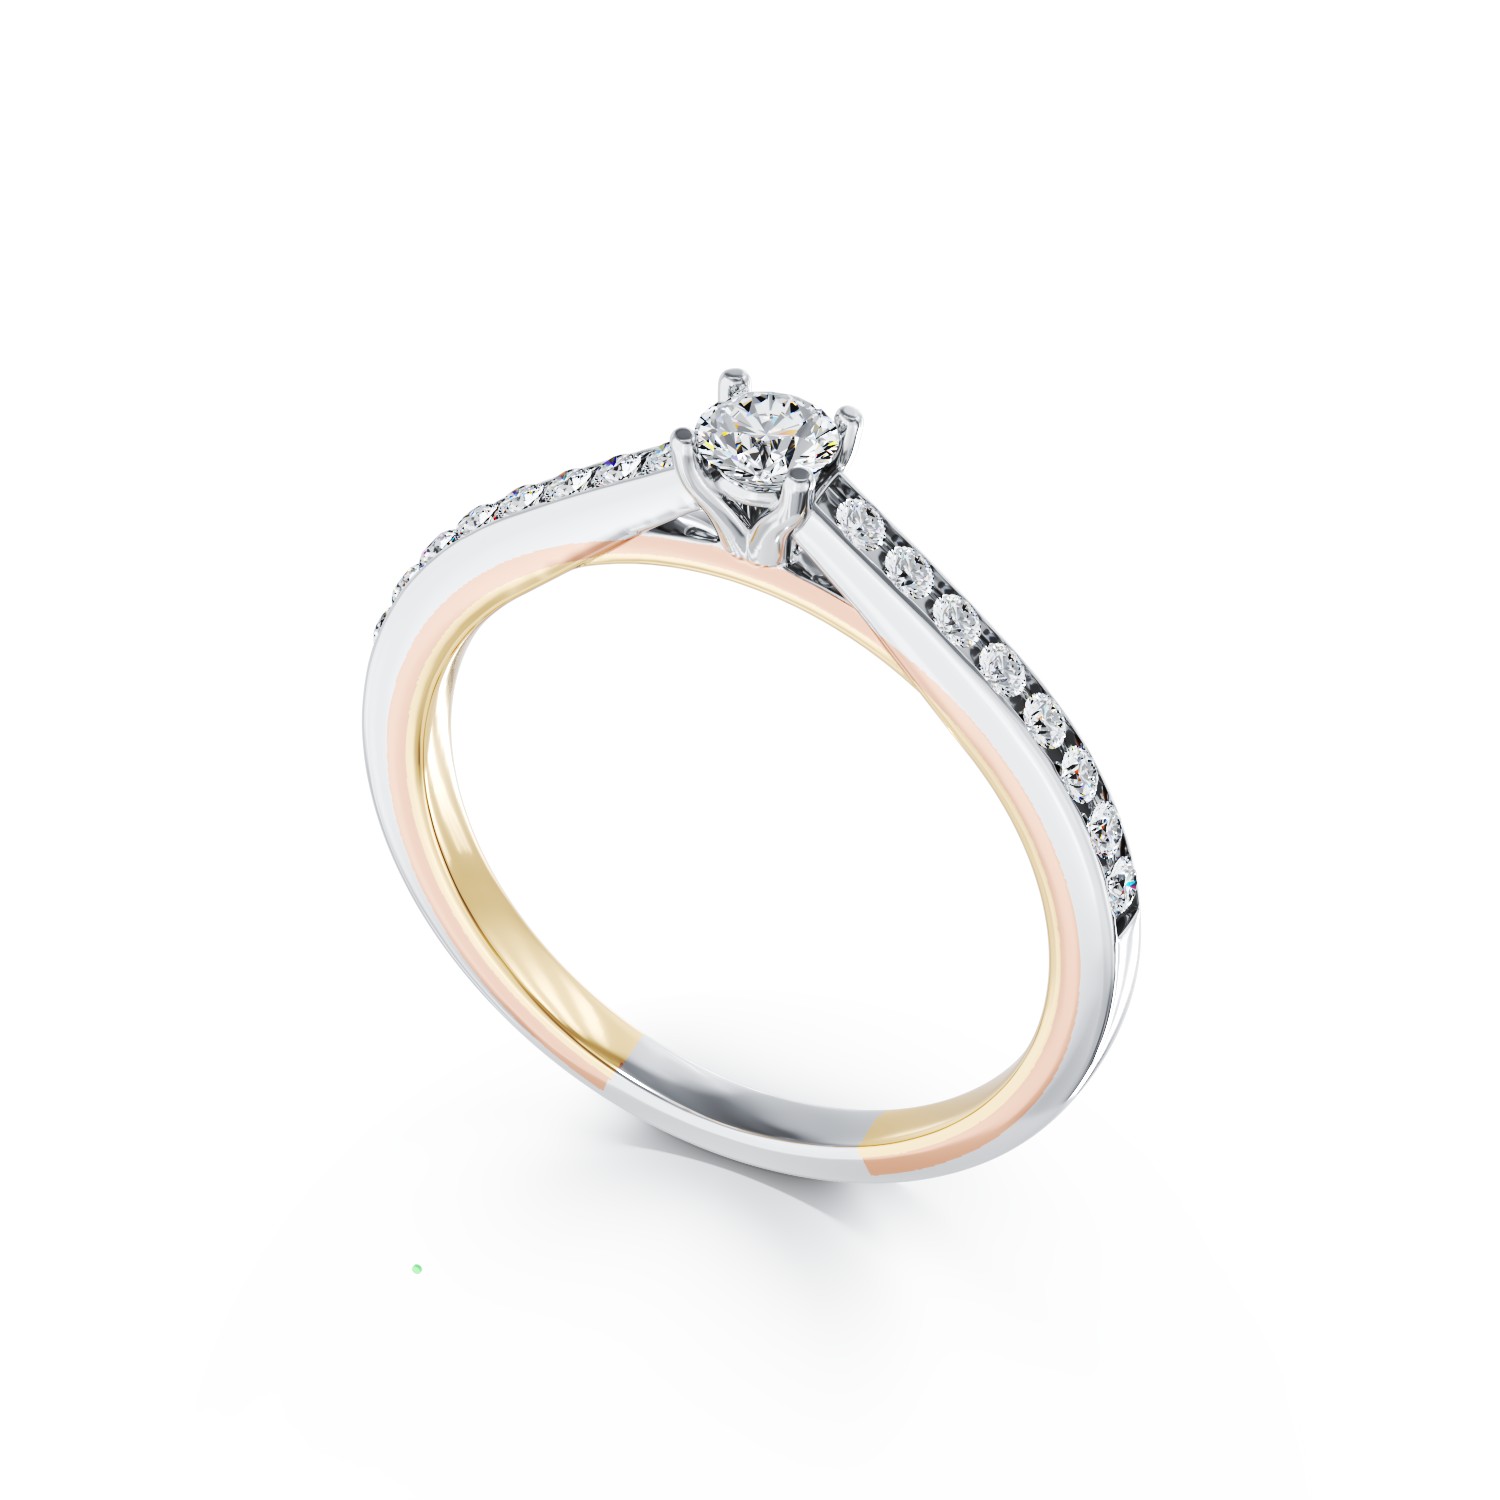 18K white gold engagement ring with 0.15ct diamond and 0.16ct diamonds